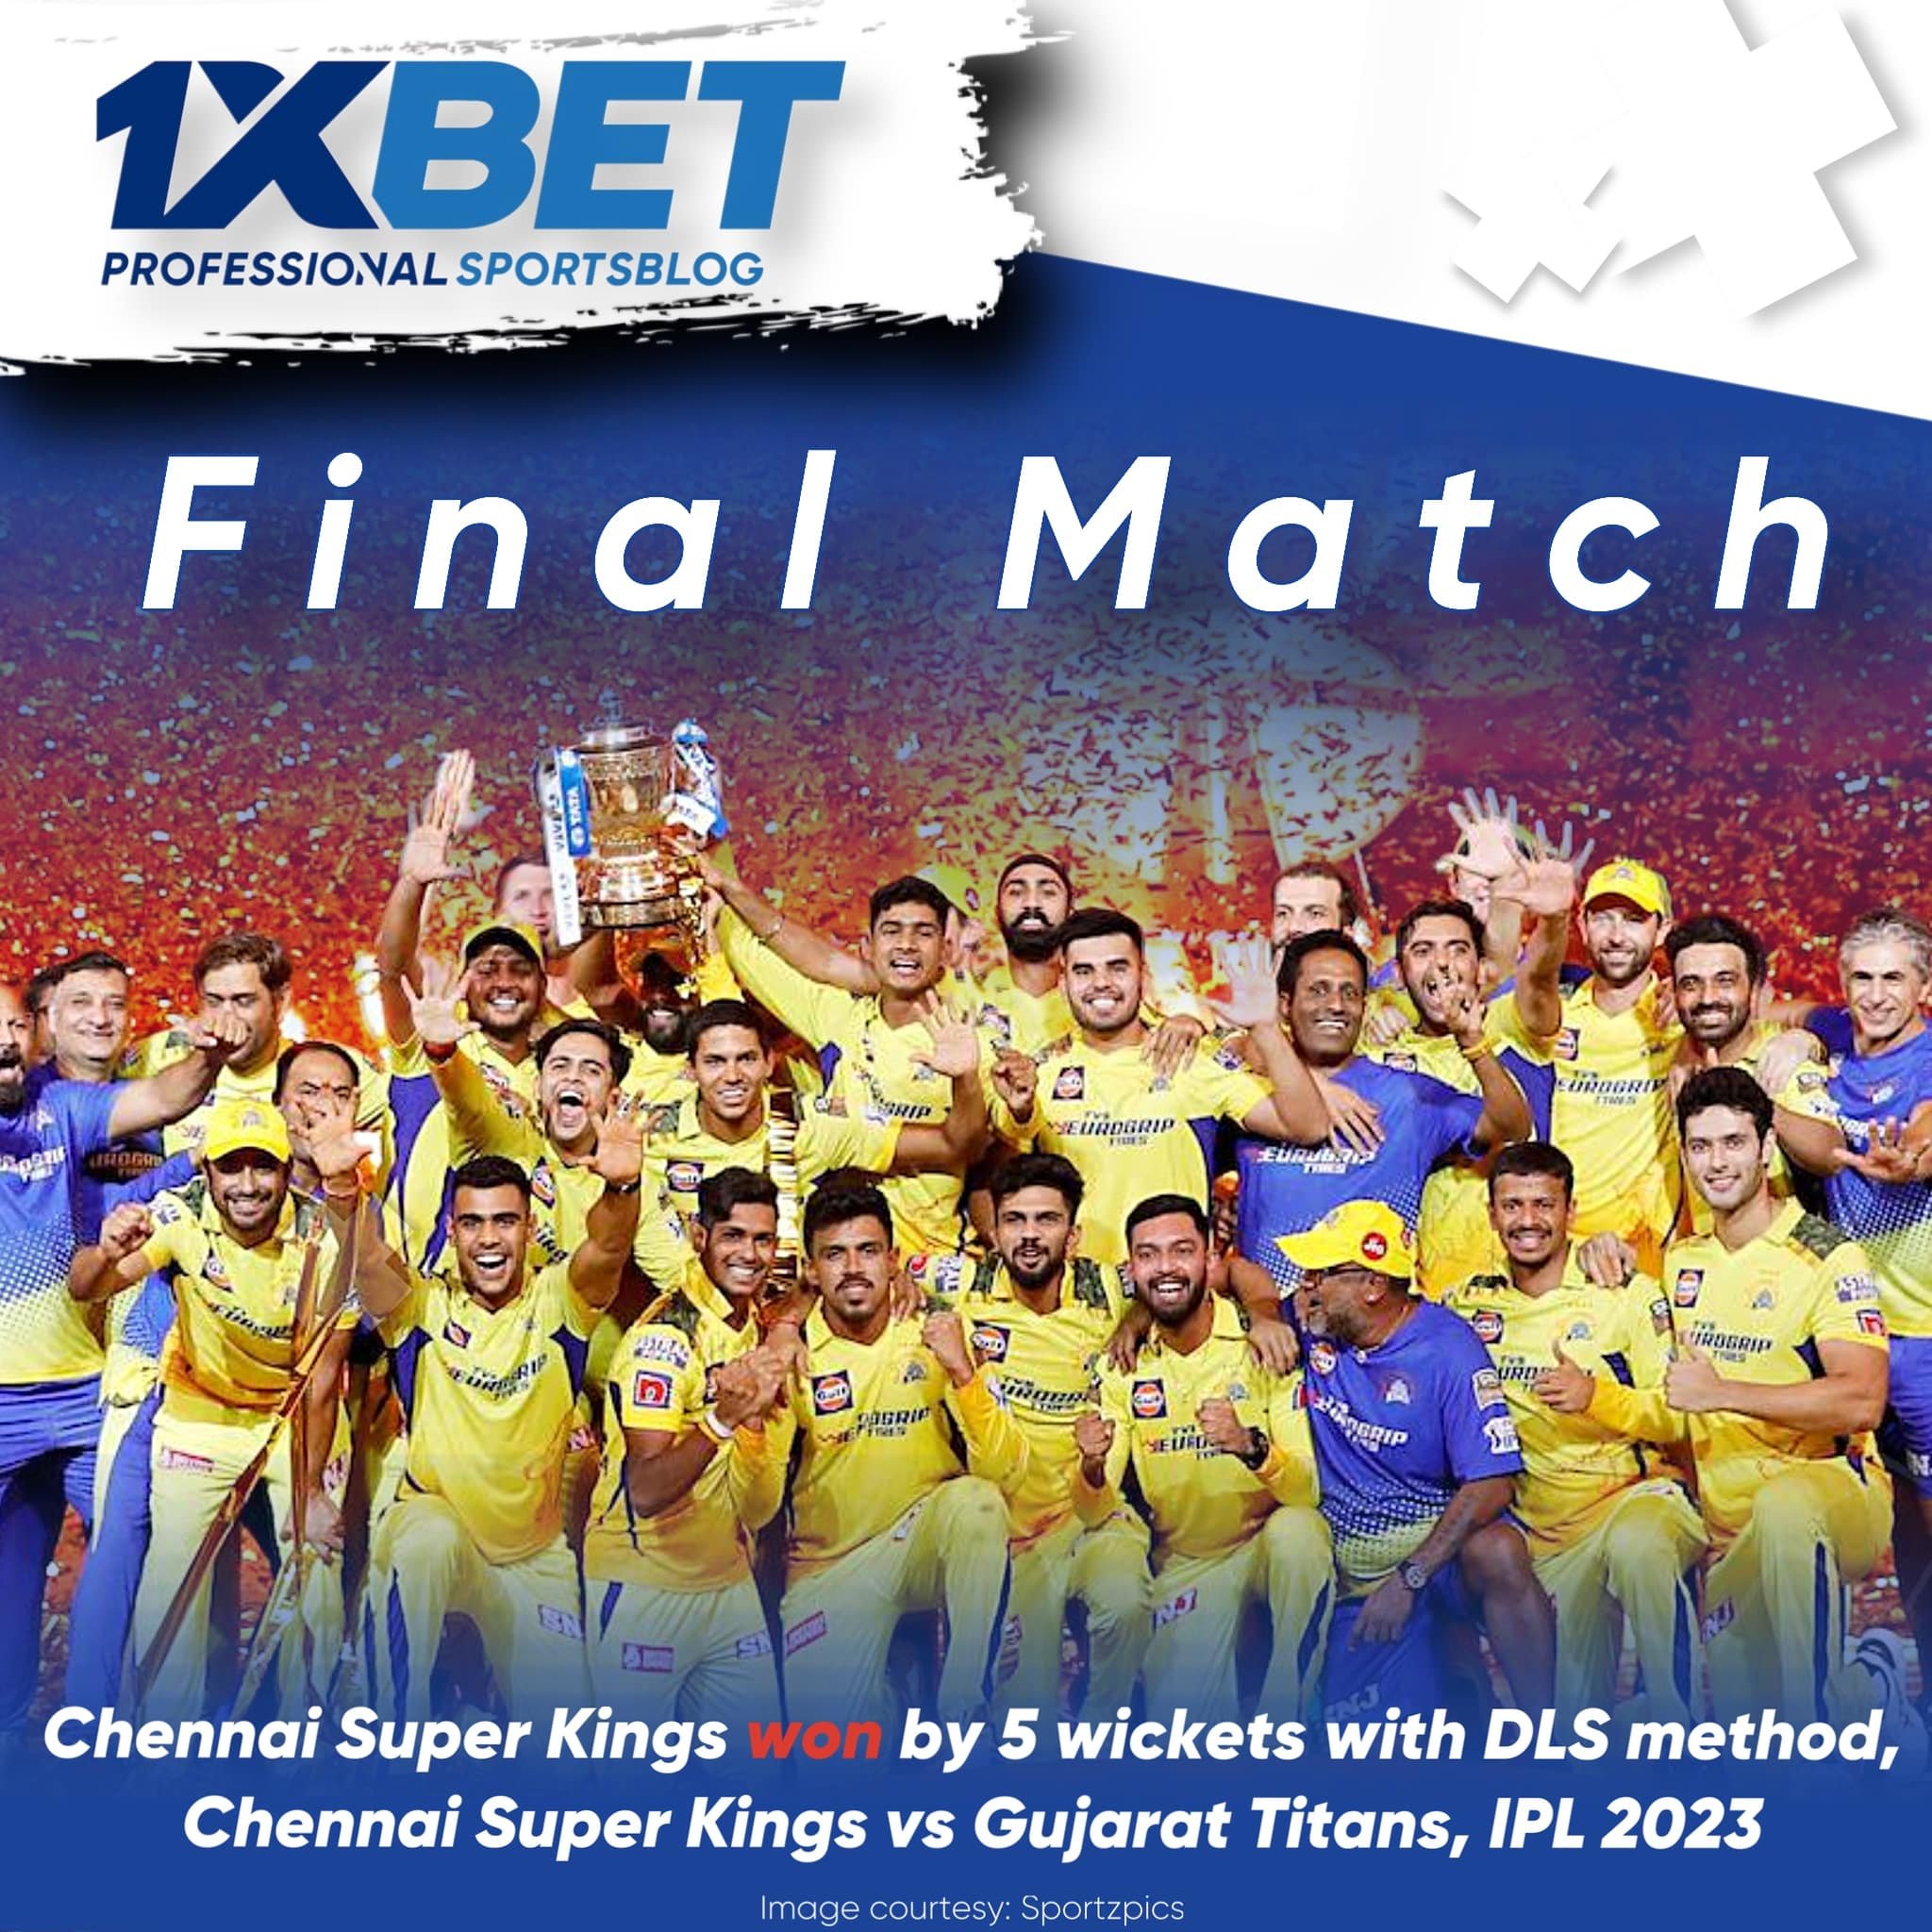 Chennai Super Kings won by 5 wickets with DLS method